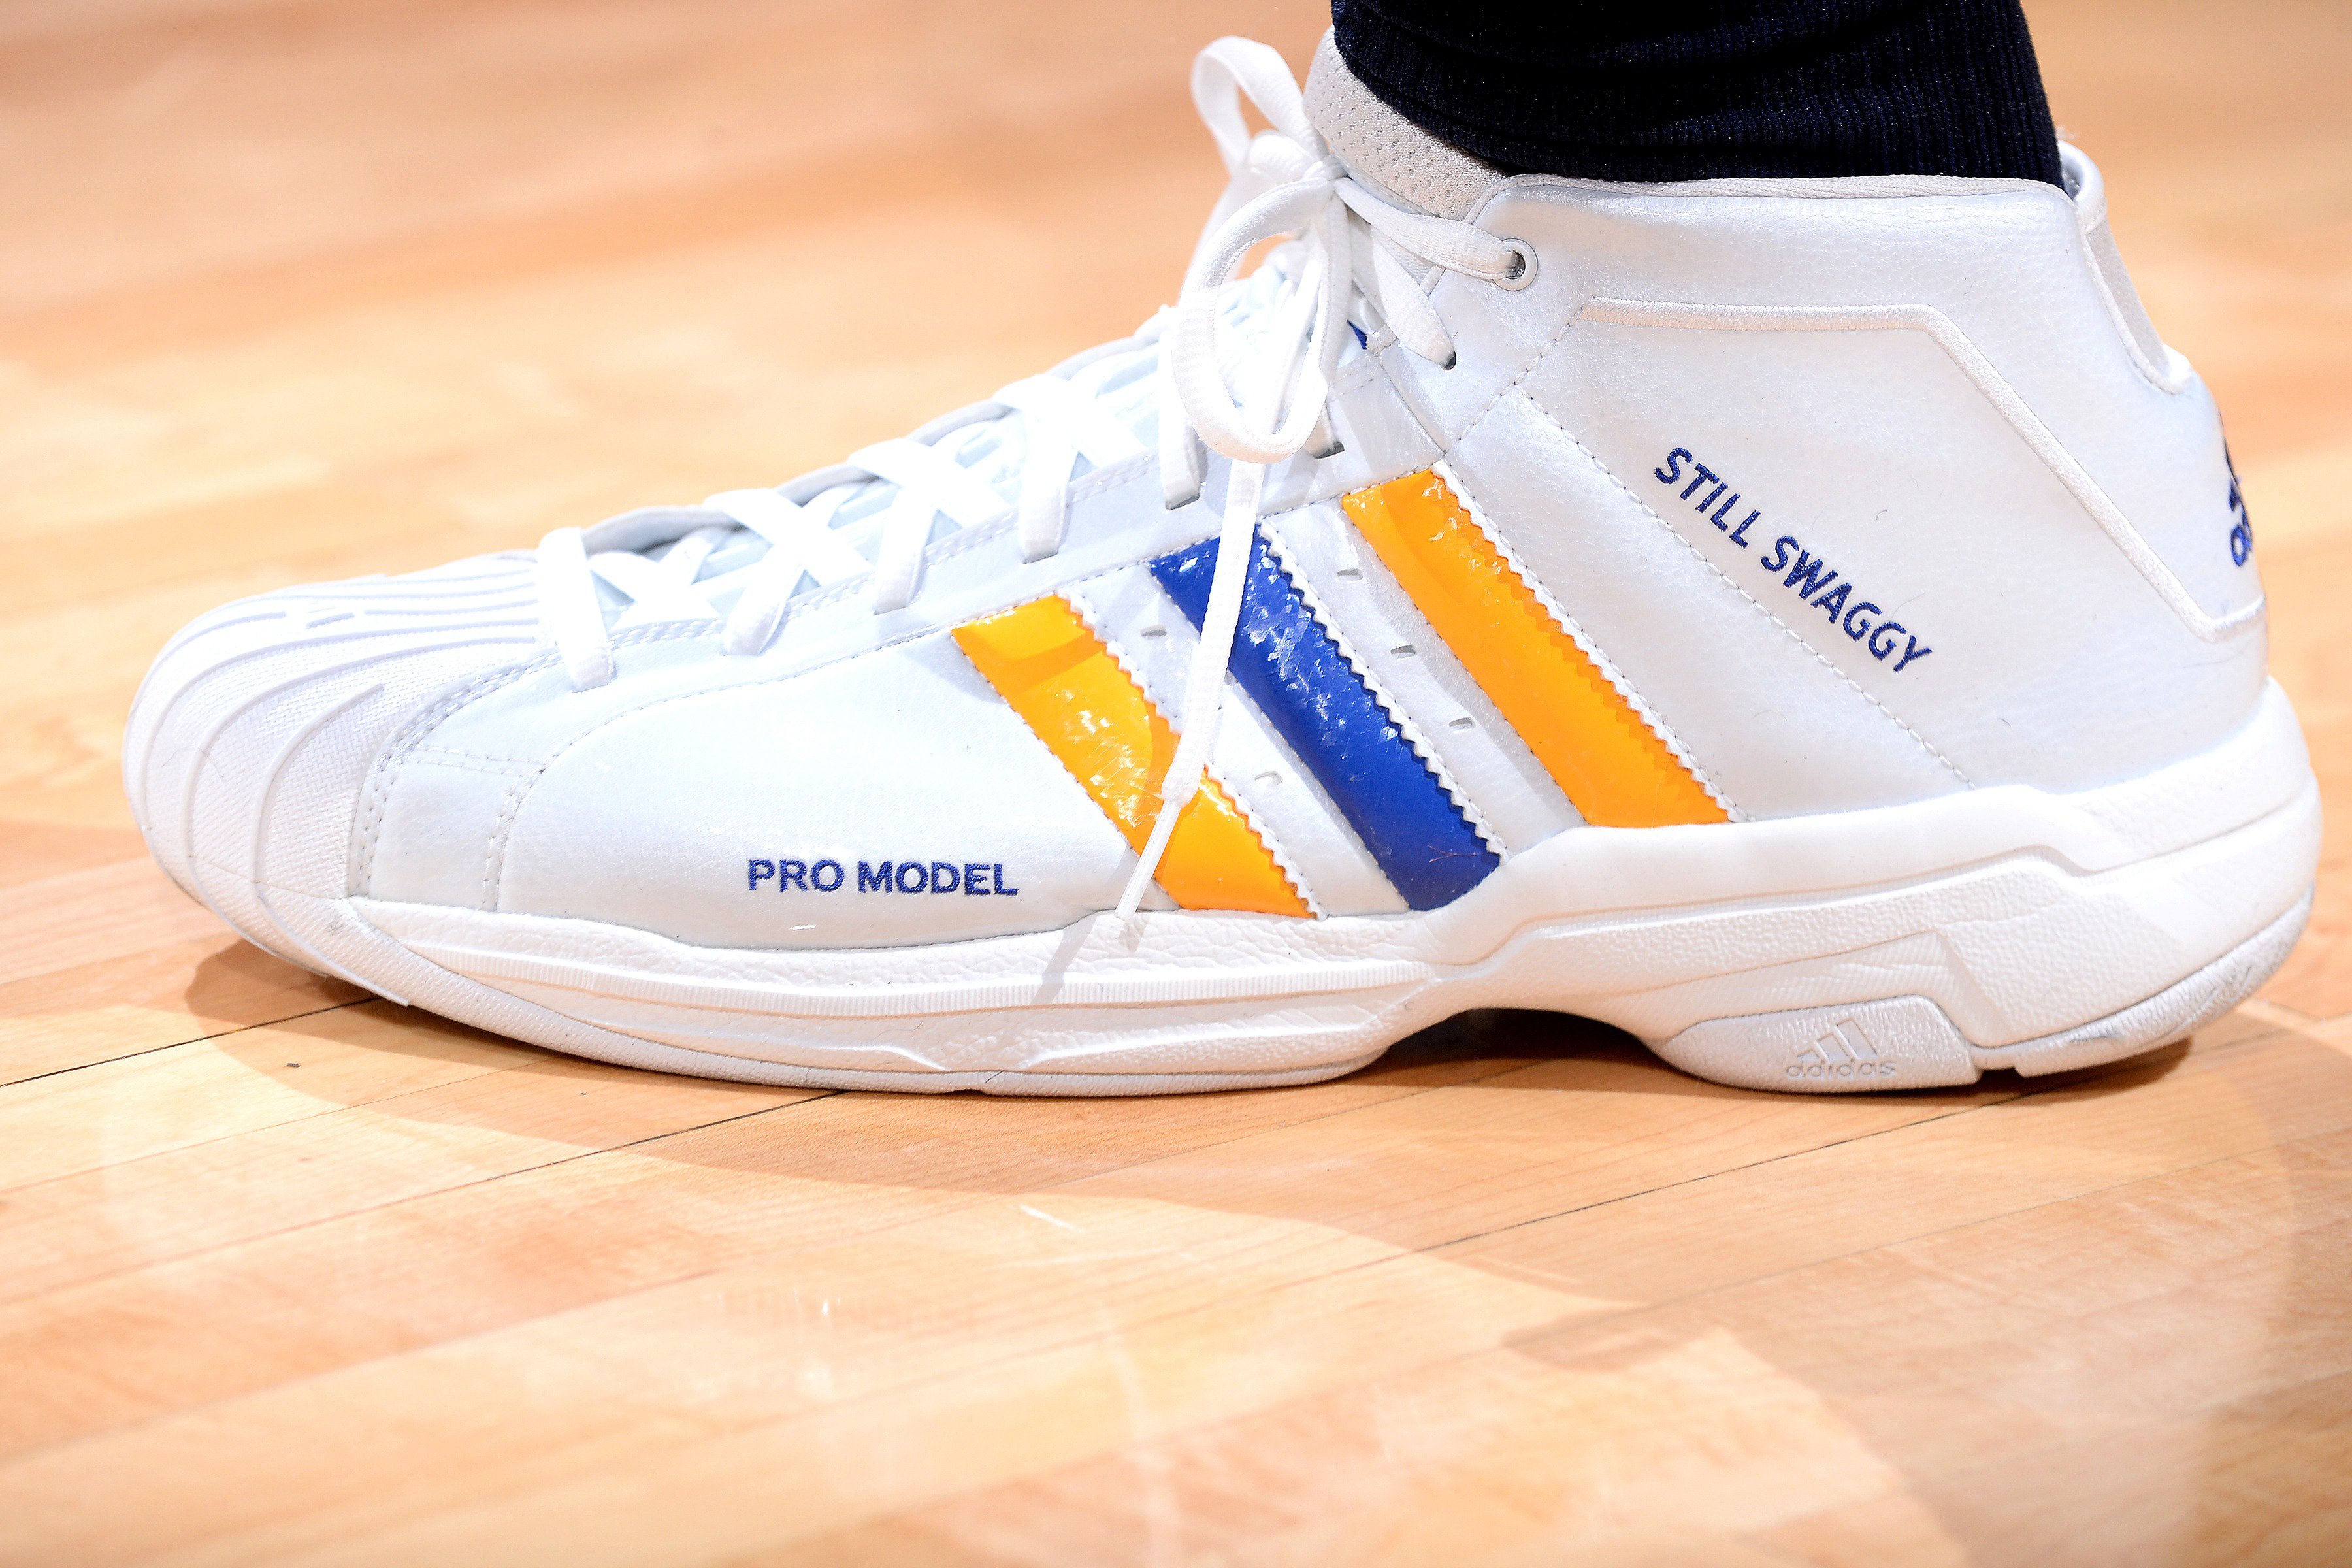 Impure taxi cold B/R Kicks on Twitter: ".@NickSwagyPYoung warms up for the Nuggets in the  “Still Swaggy” Adidas Pro Model PE https://t.co/LcfyZK5p47" / Twitter